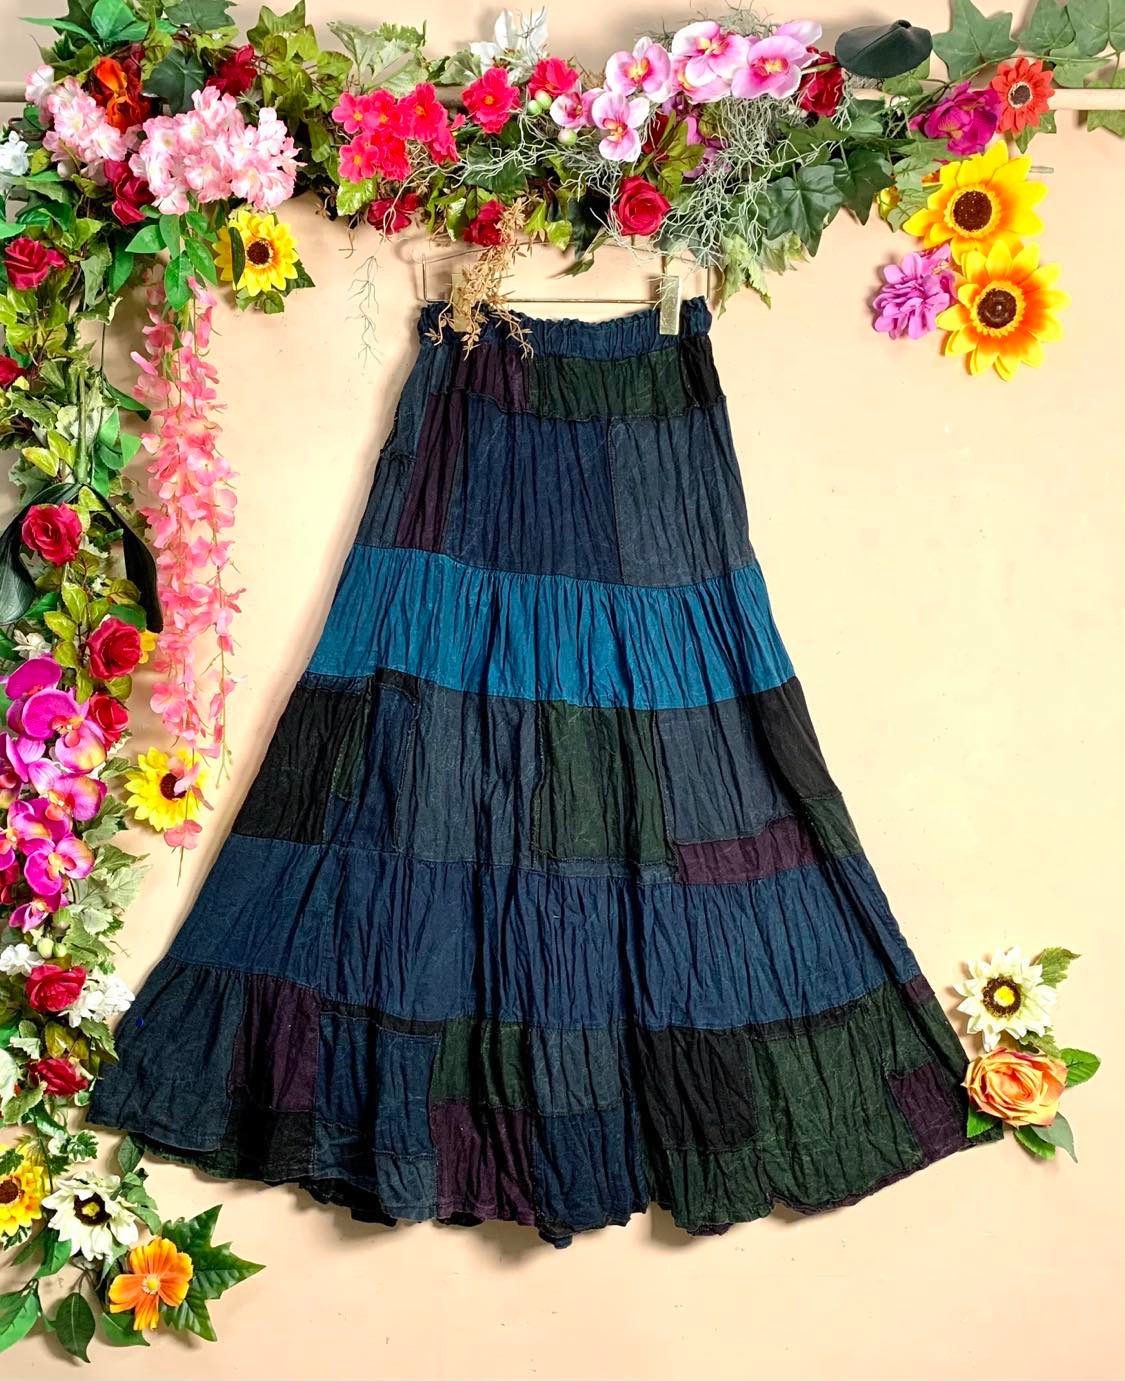 Hmong Gypsy Patchwork Skirt